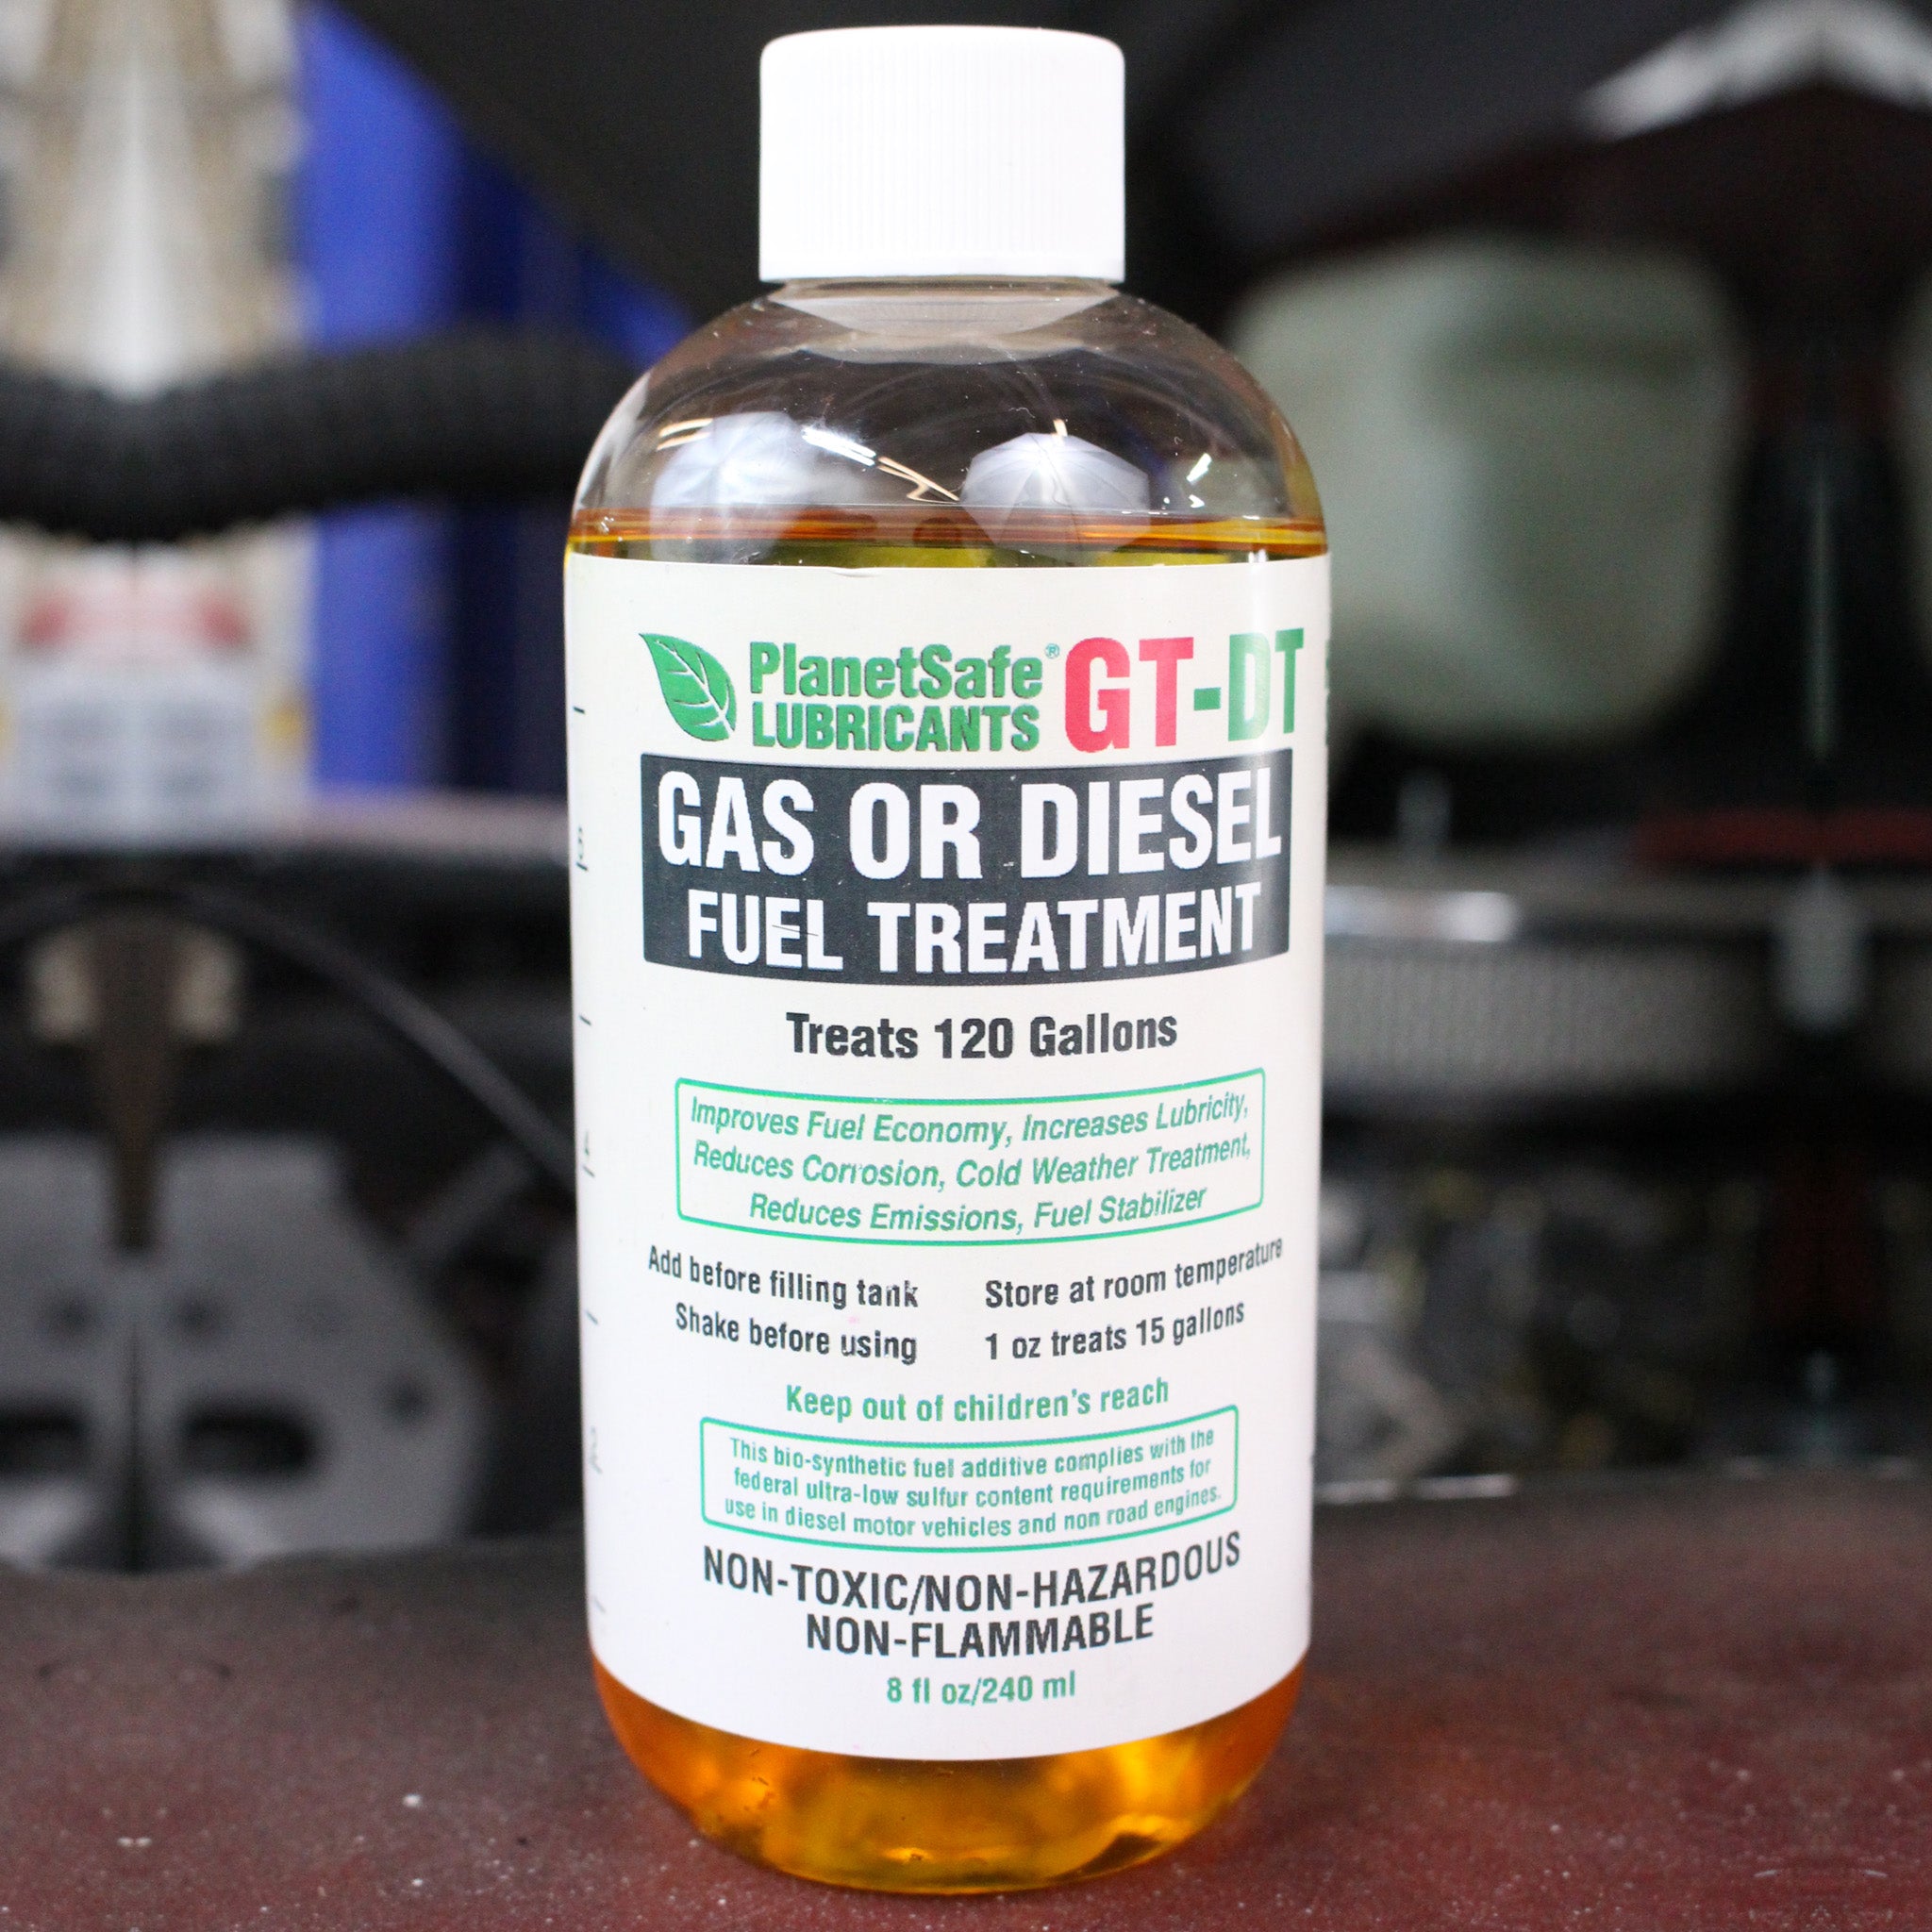 PlanetSafe Lubricants GT-DT 8oz Gasoline or Diesel Fuel Treatment - increased engine power - improve gas engine power increase diesel engine power fuel treatment additive